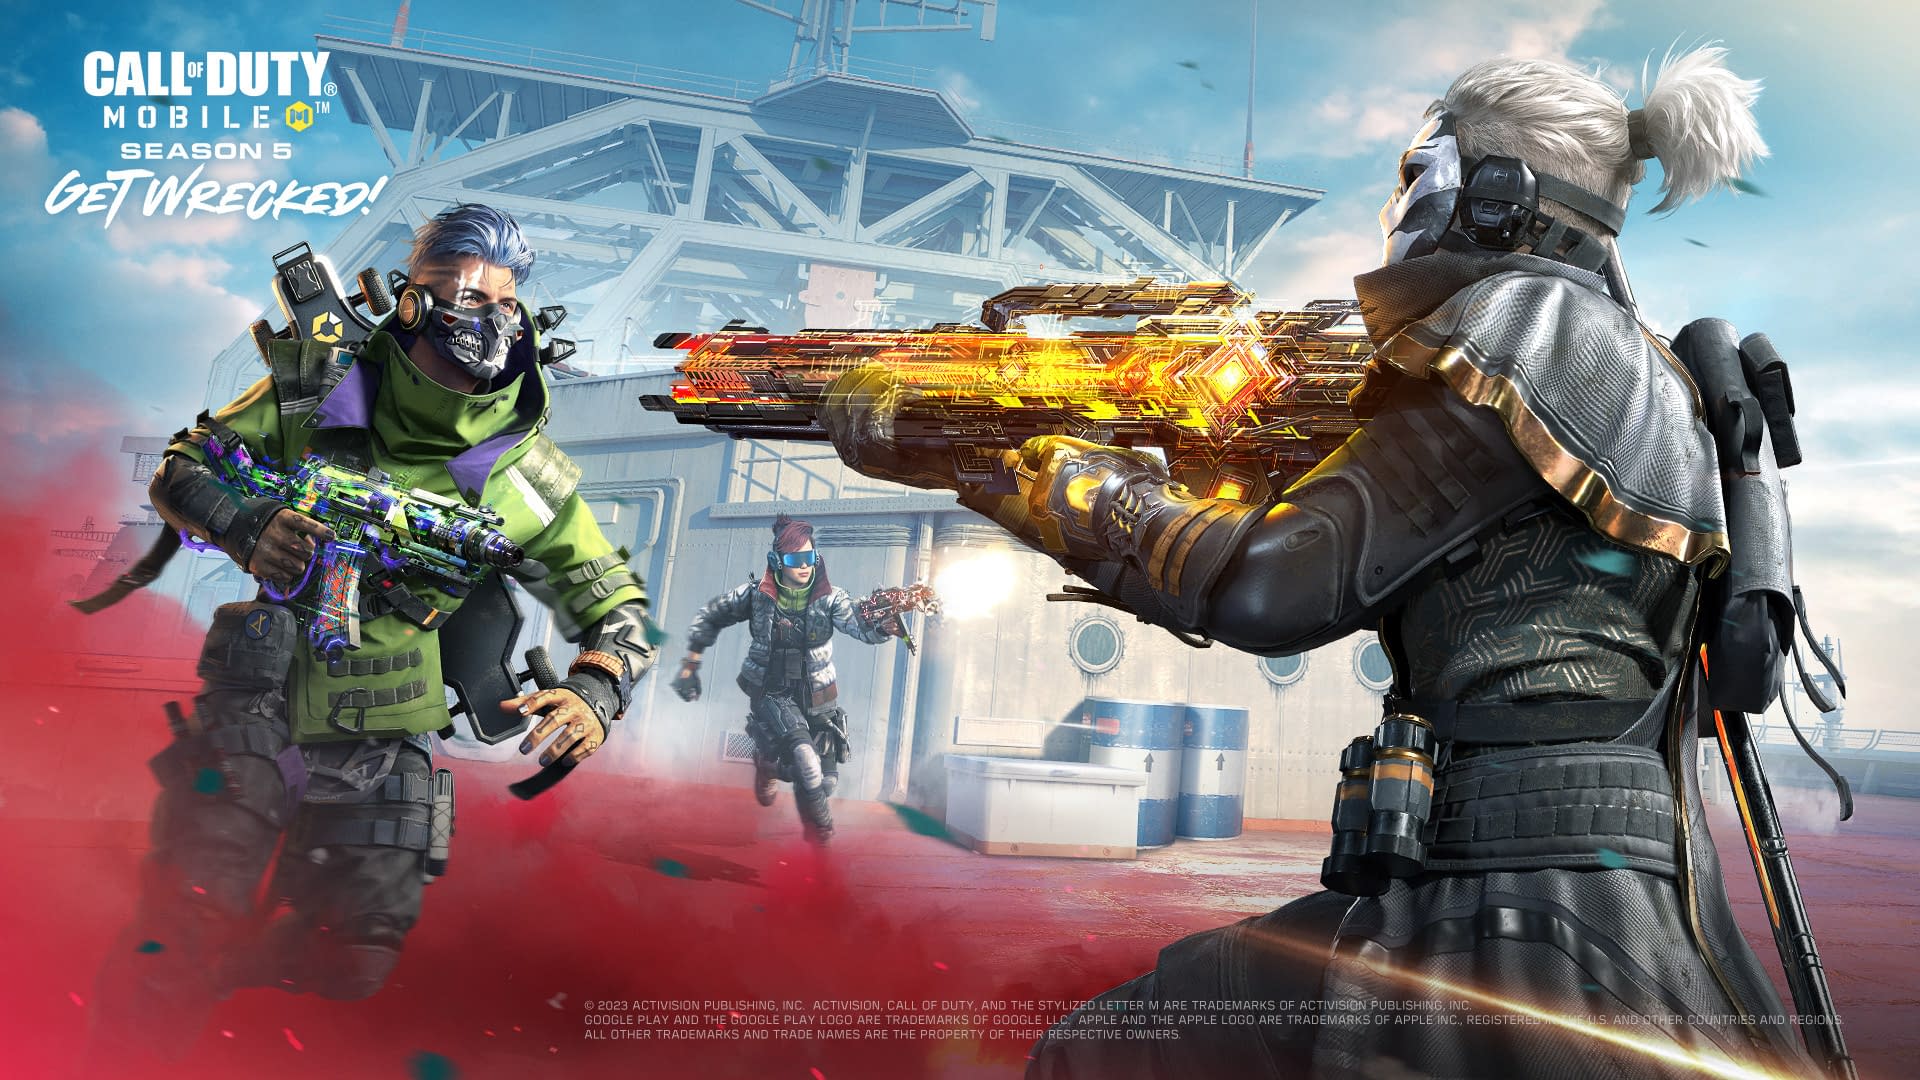 Call Of Duty: Mobile Reveals Details Of Season 5: Get Wrecked!